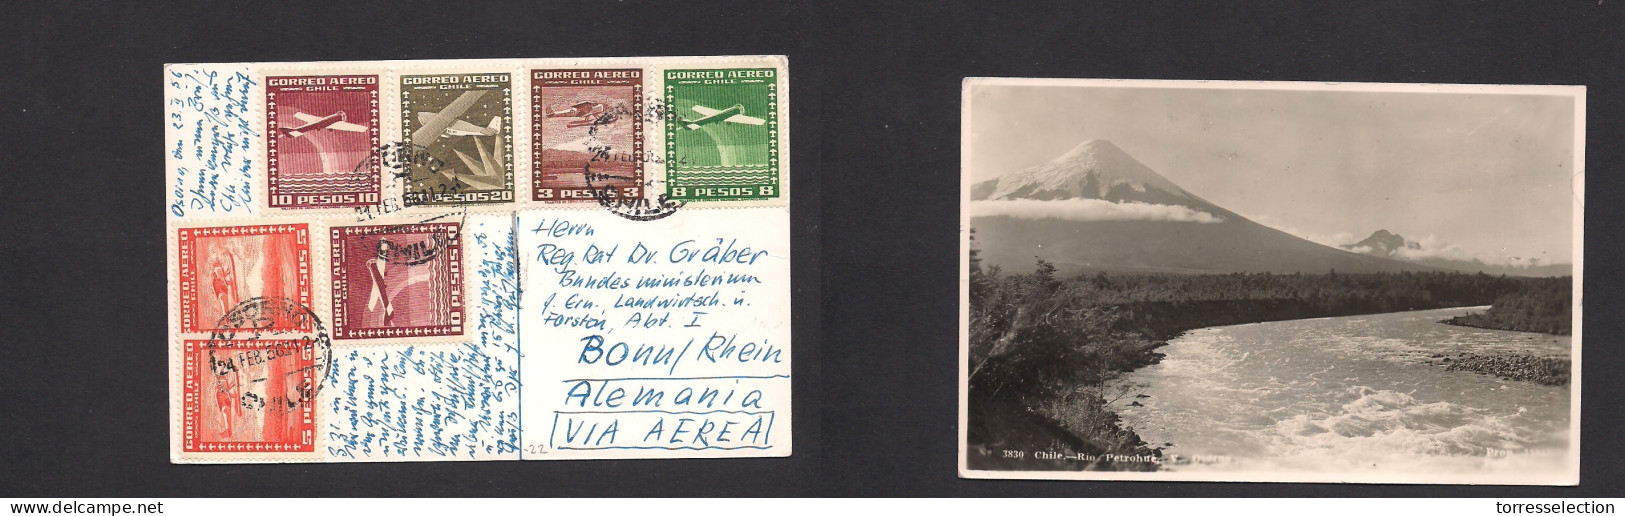 Chile - XX. 1956 (24 Febr) Osorno - West Germany, Bonn. Air Multifkd Env At 61 Pesos Rate, Tied Cds. Attractive. - Chili